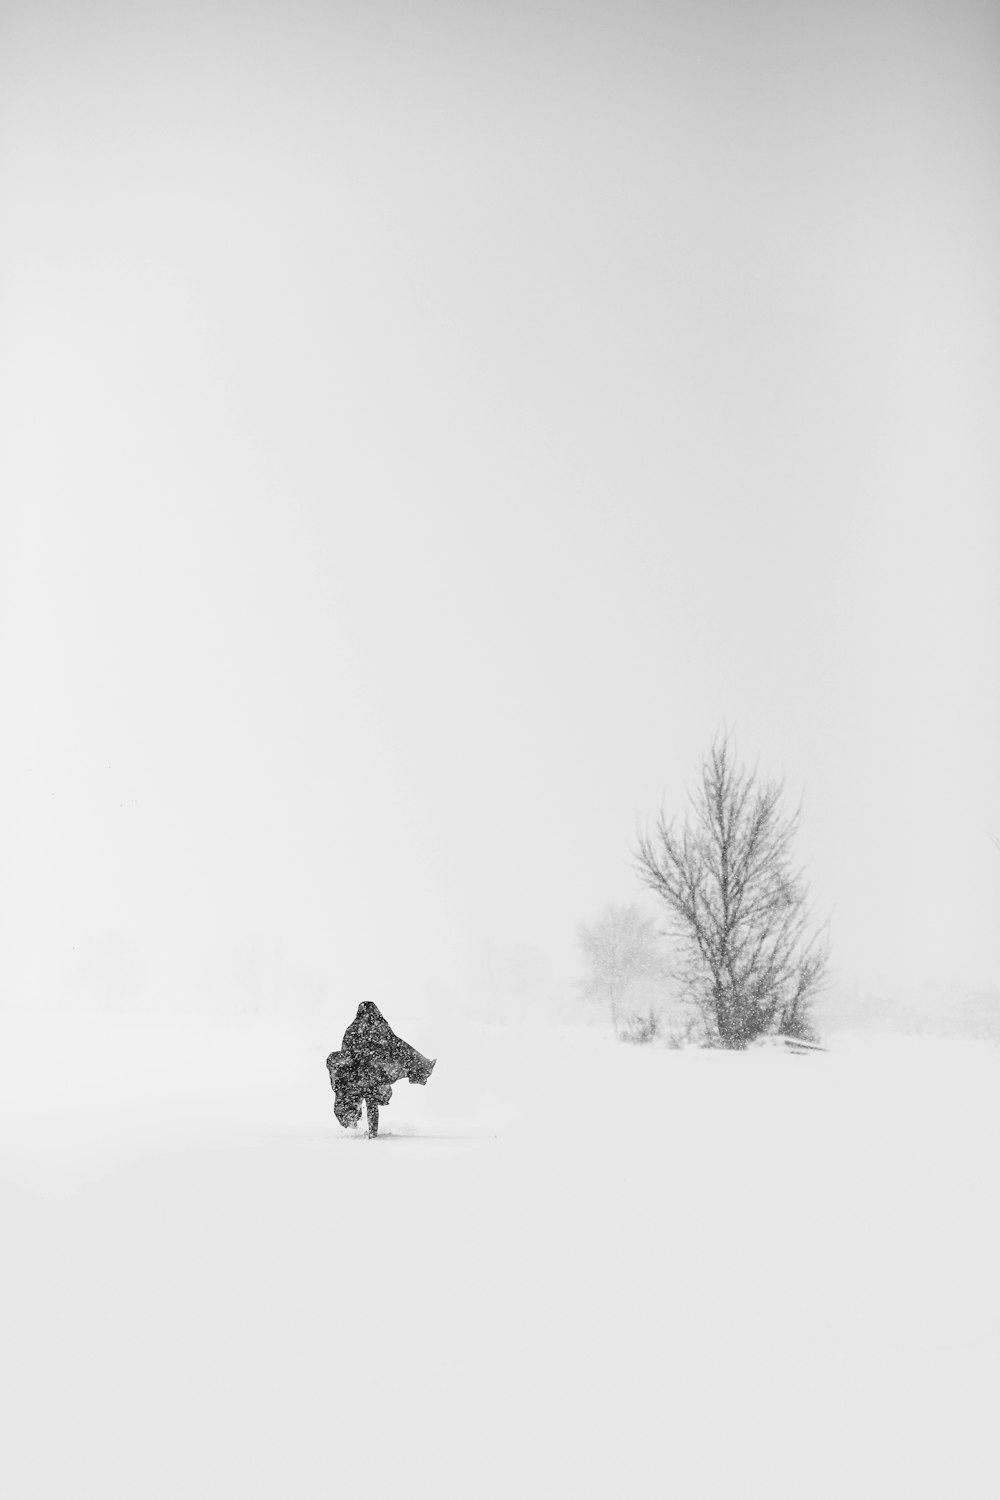 a black and white photo of a person walking in the snow